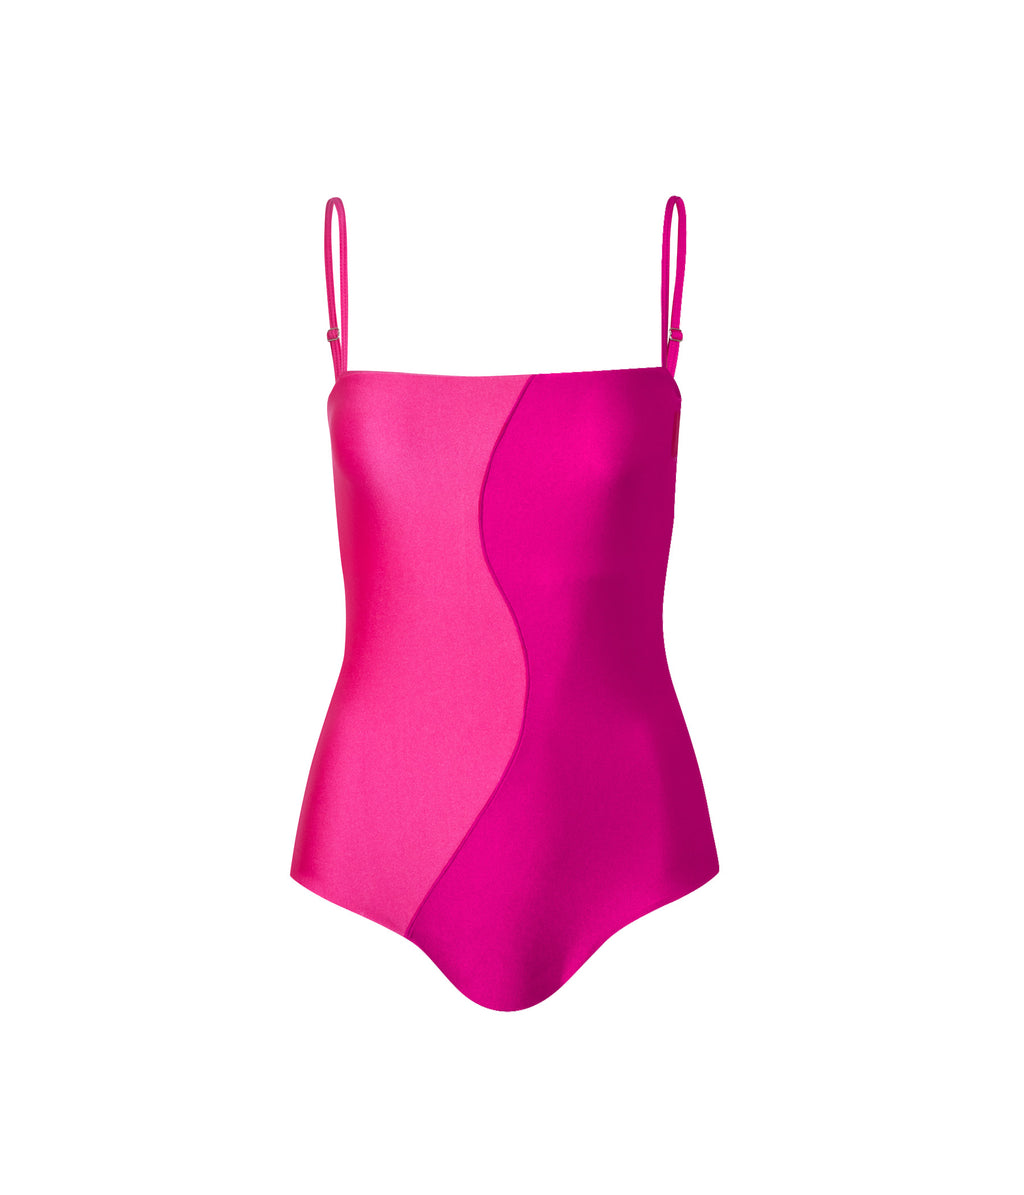 SKIN by SAME Swim One Piece Neon Green/Neon Pink OP-NGNP - Free Shipping at  Largo Drive